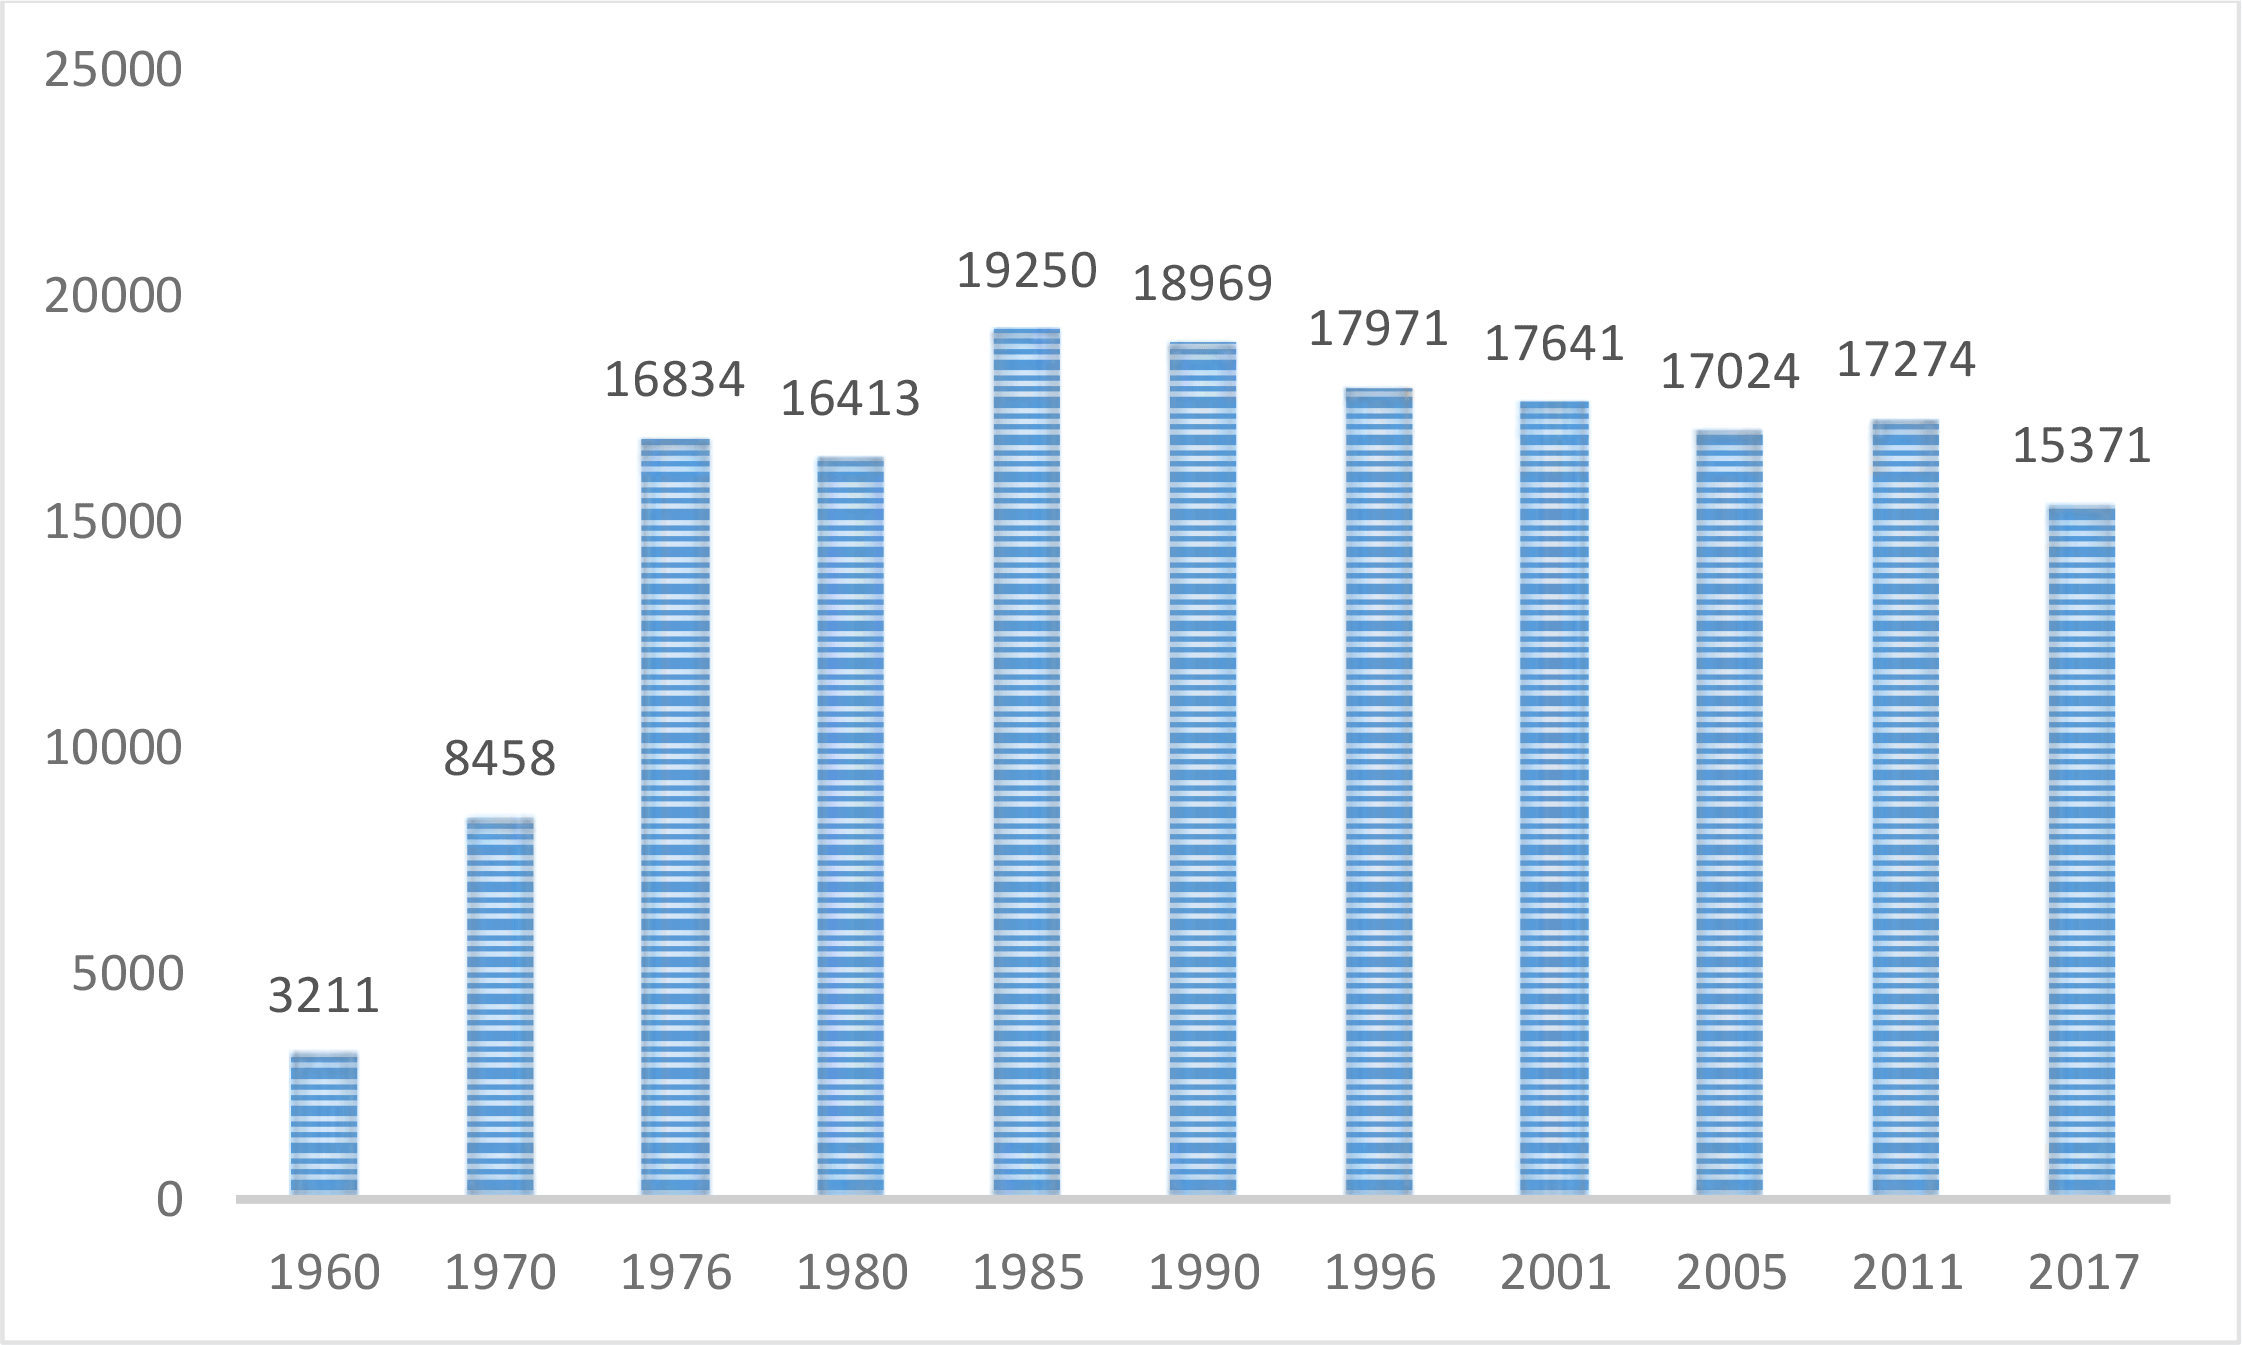 Figure 1: Population trends in Tiszaújváros (Source: Hungarian Central Statistical Office)